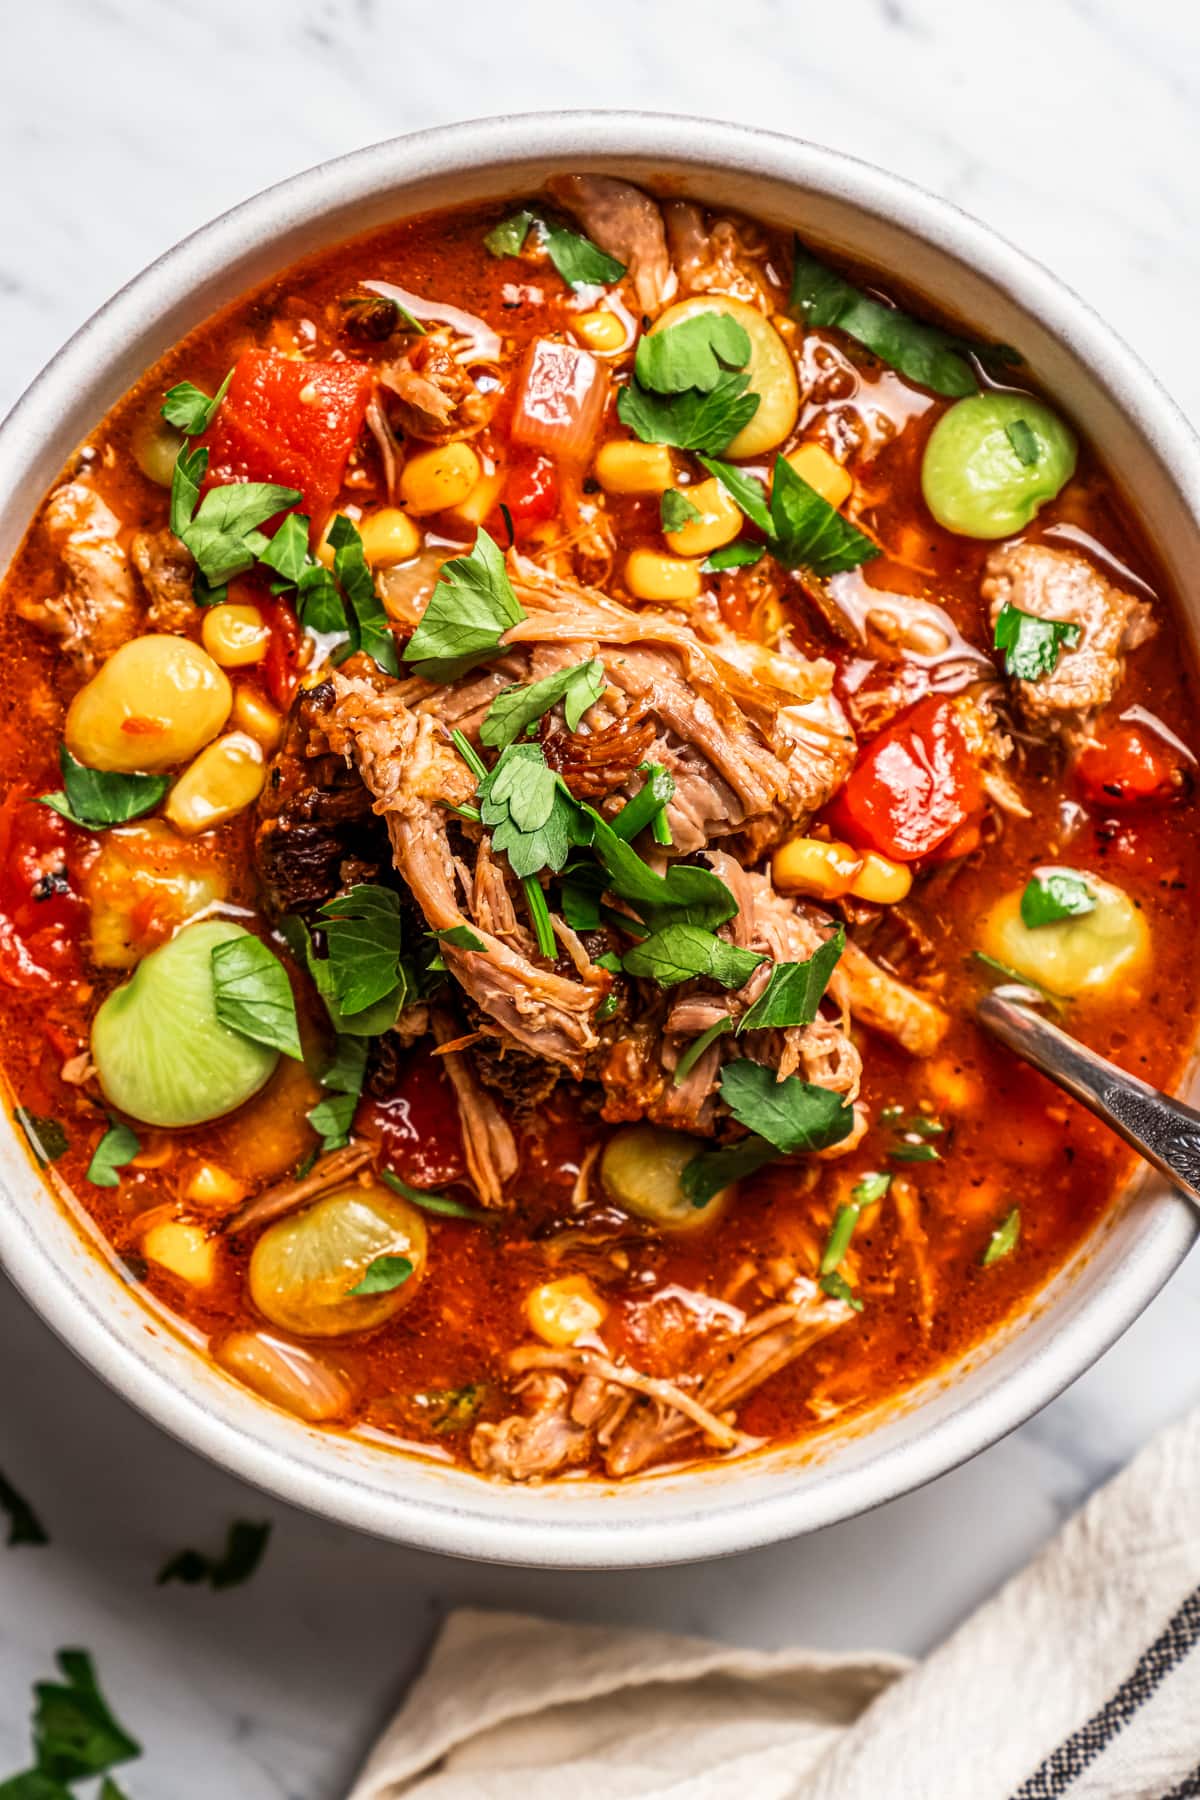 Photo of Brunswick stew served in a bowl with a spoon.